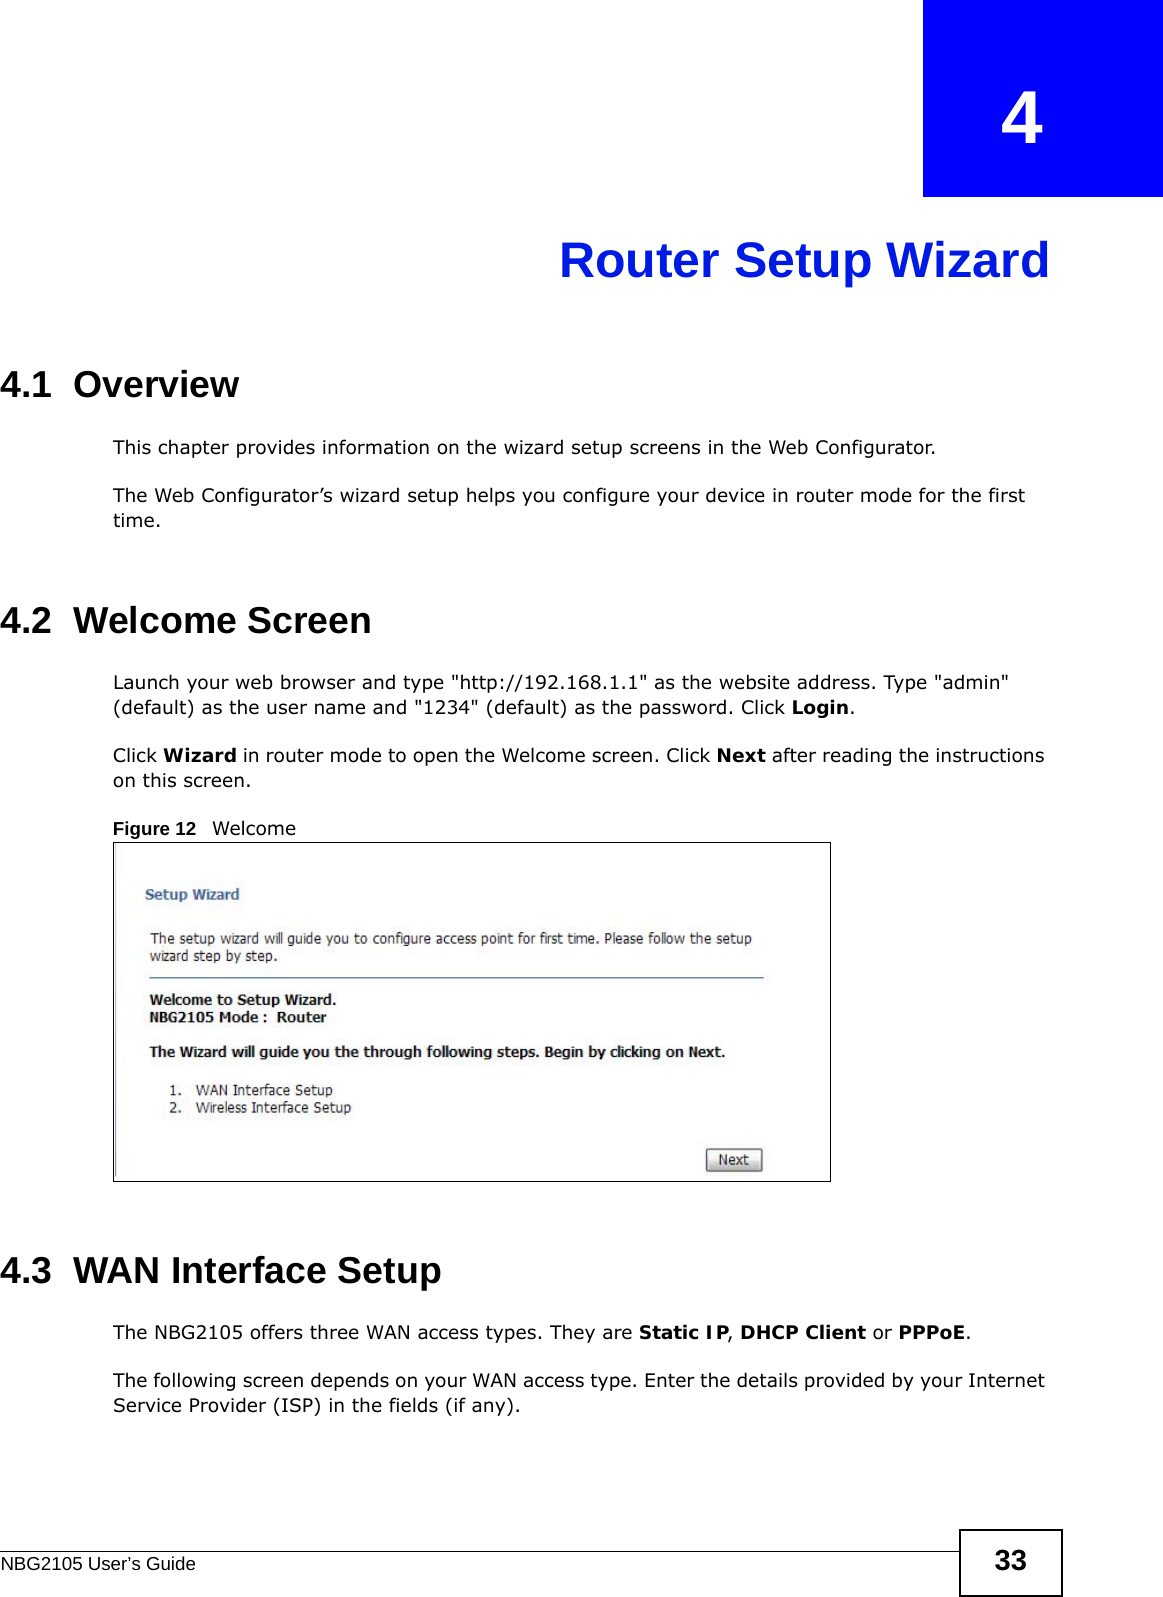 NBG2105 User’s Guide 33CHAPTER   4Router Setup Wizard4.1  OverviewThis chapter provides information on the wizard setup screens in the Web Configurator.The Web Configurator’s wizard setup helps you configure your device in router mode for the first time.4.2  Welcome ScreenLaunch your web browser and type &quot;http://192.168.1.1&quot; as the website address. Type &quot;admin&quot; (default) as the user name and &quot;1234&quot; (default) as the password. Click Login.Click Wizard in router mode to open the Welcome screen. Click Next after reading the instructions on this screen.Figure 12   Welcome 4.3  WAN Interface SetupThe NBG2105 offers three WAN access types. They are Static IP, DHCP Client or PPPoE.The following screen depends on your WAN access type. Enter the details provided by your Internet Service Provider (ISP) in the fields (if any).